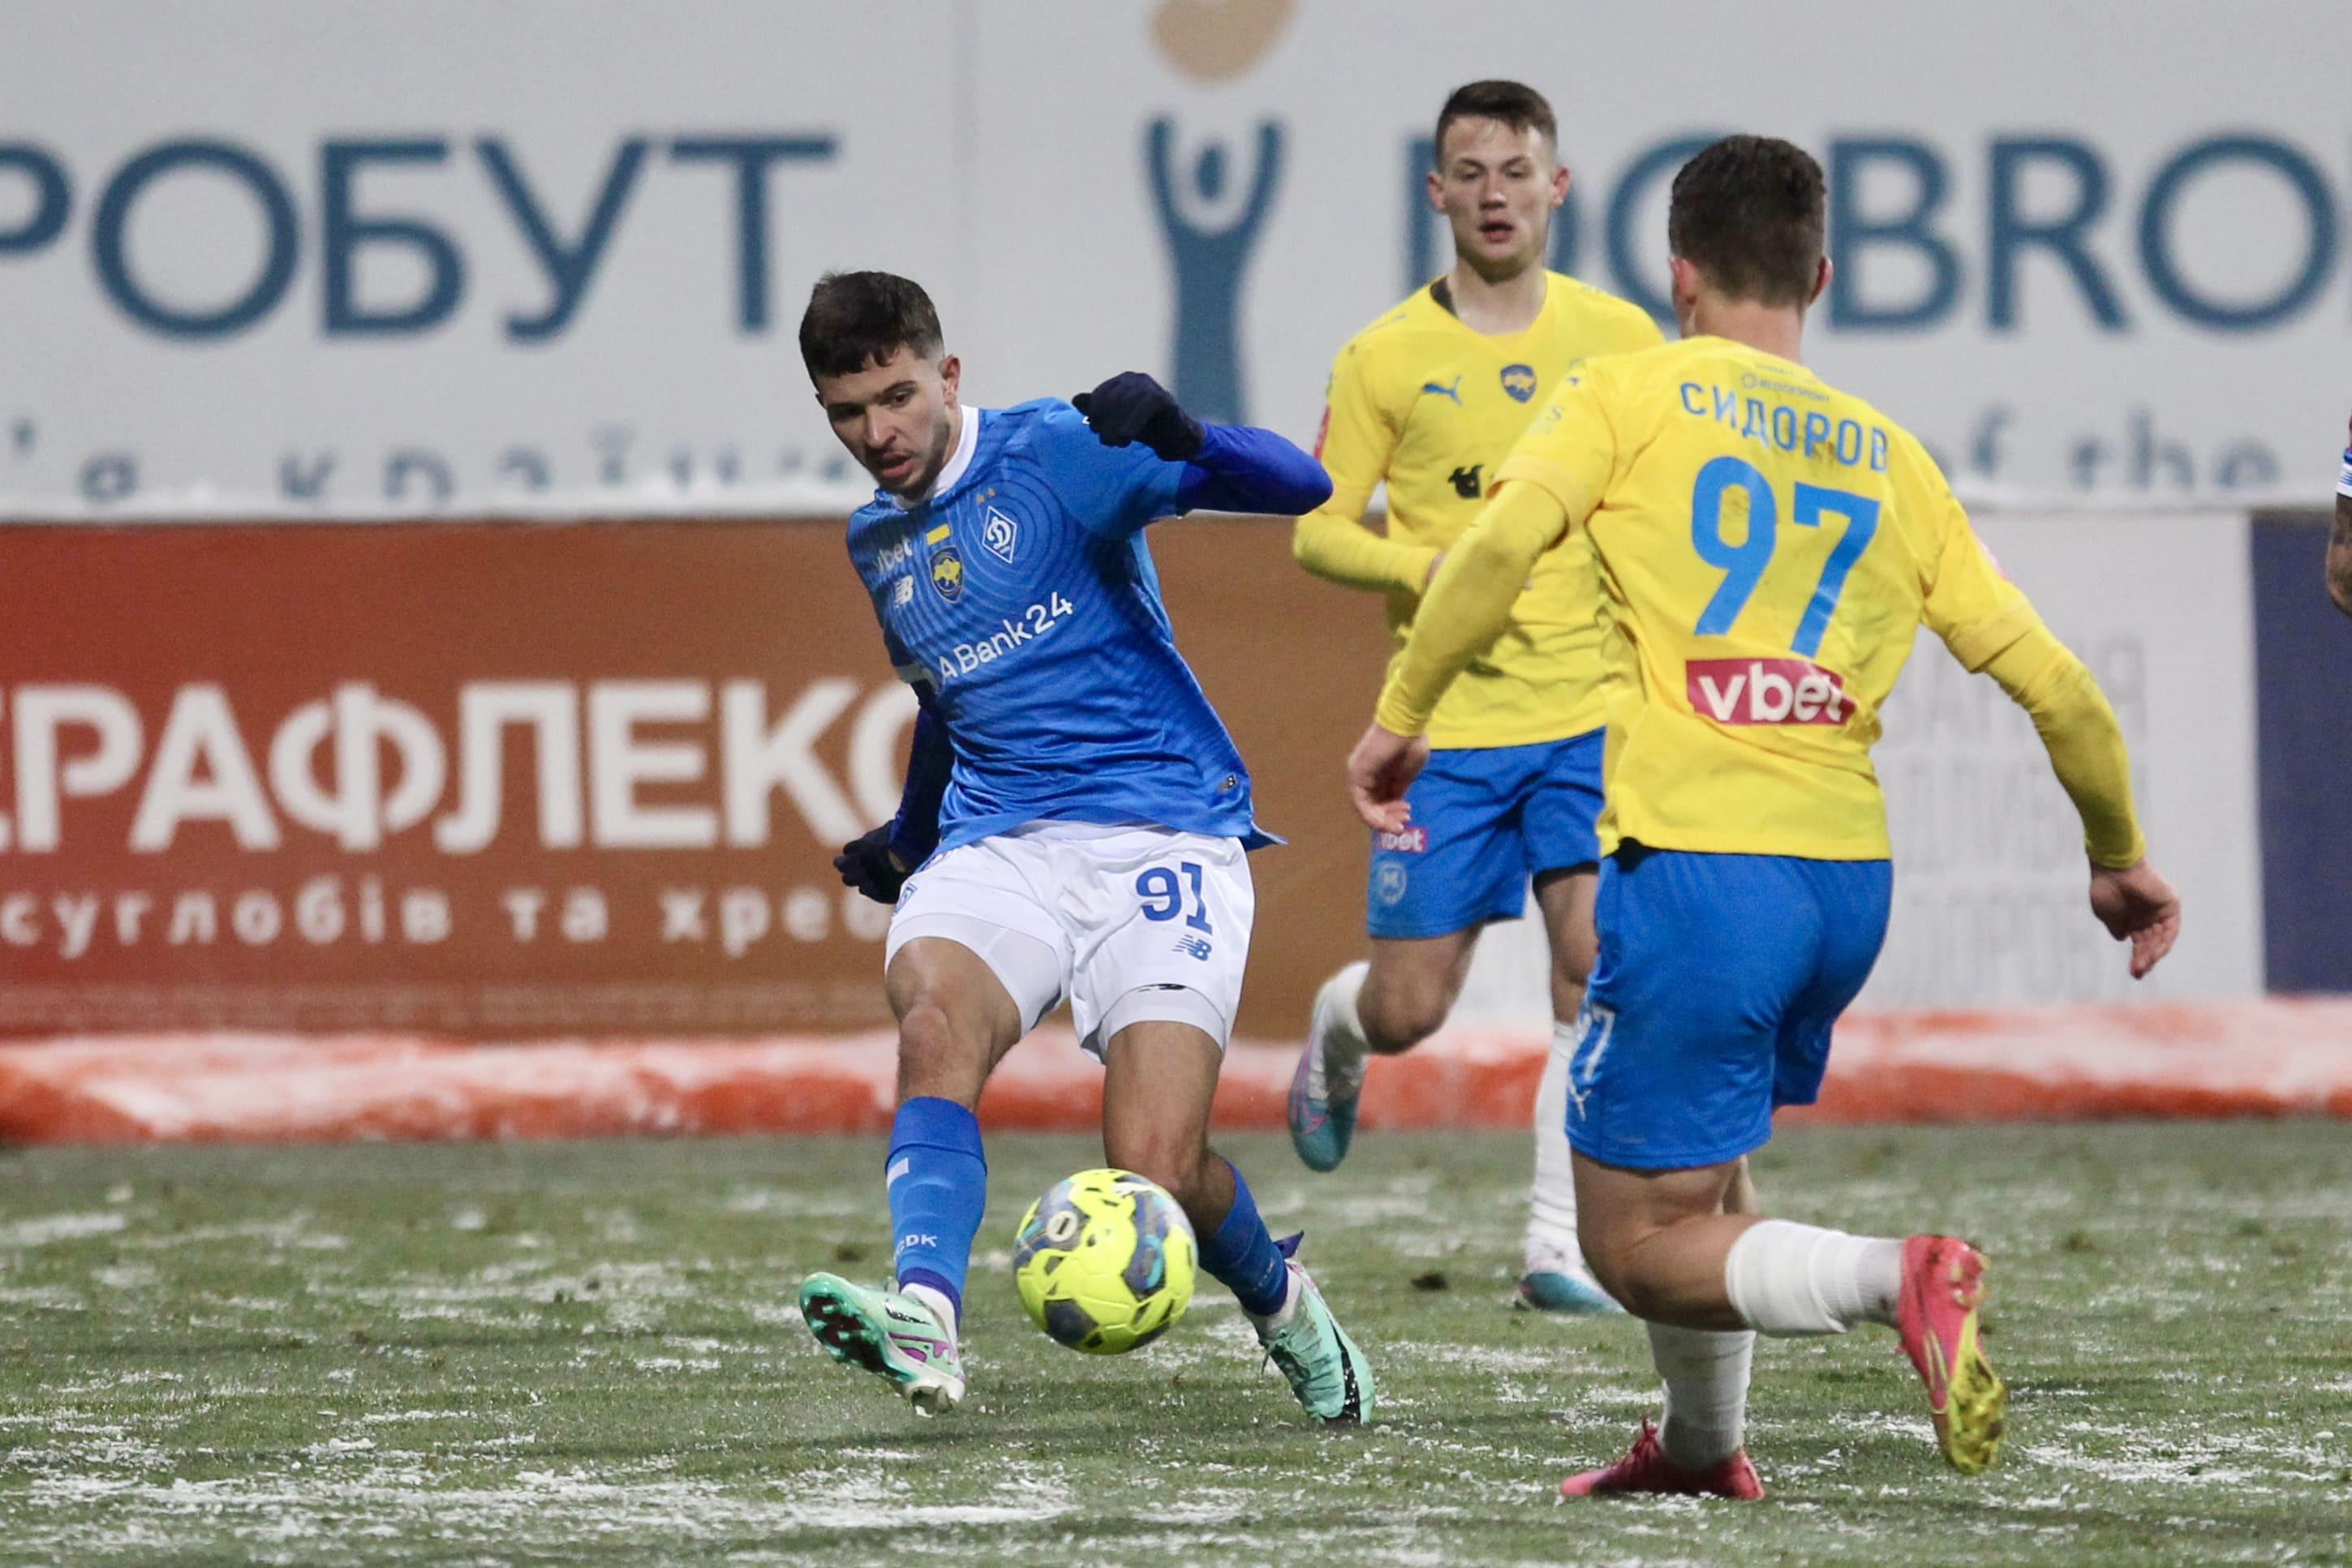 Dynamo to face Metalist 1925 on February 25